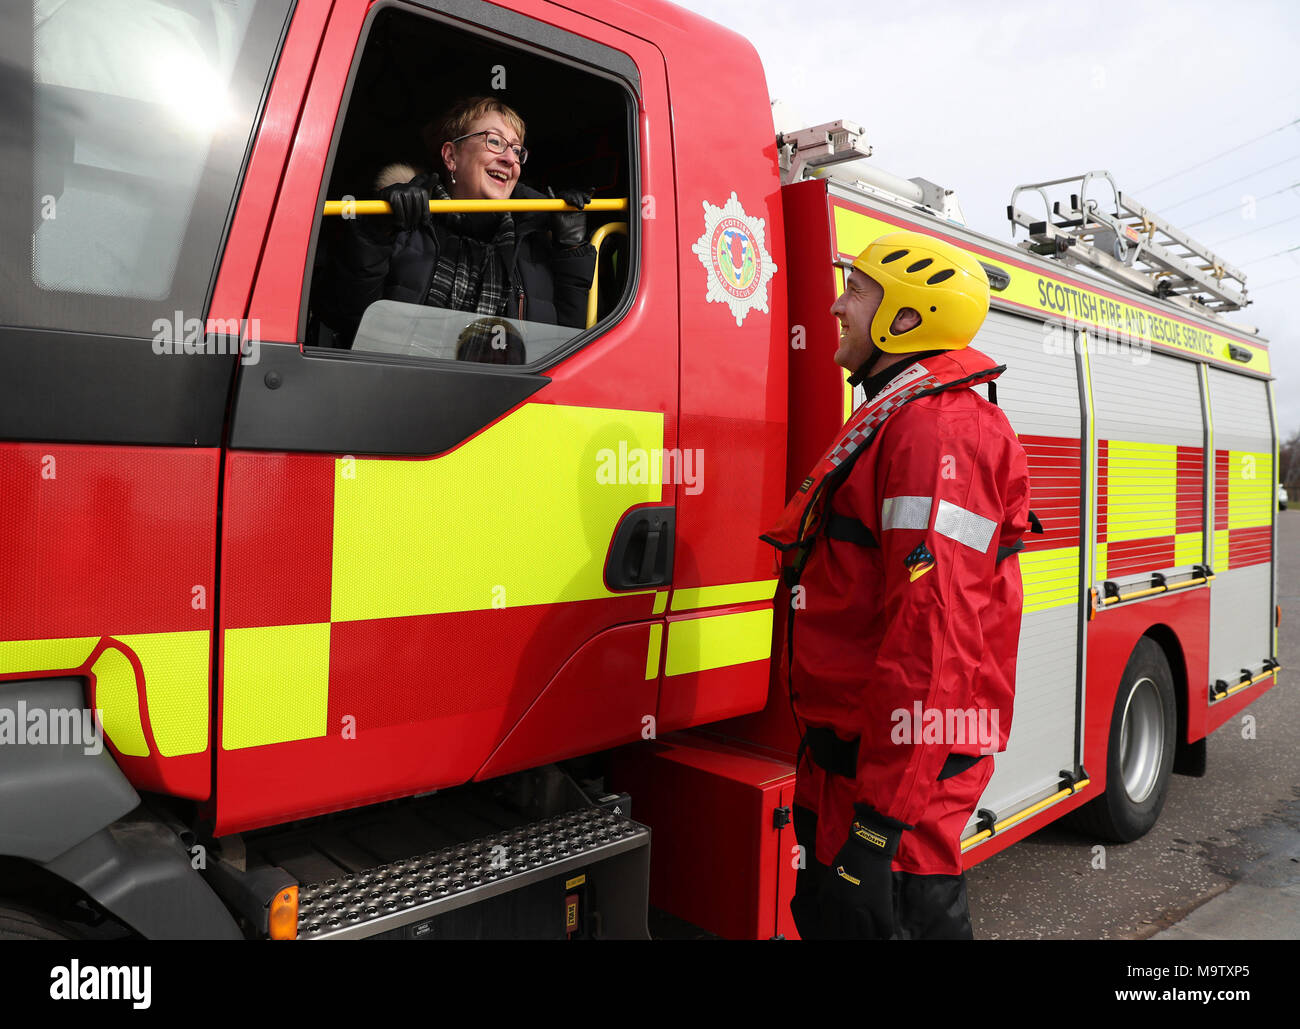 Community Safety Minister Annabelle Ewing chats with fireman Jamie Scott from Falkirk fire station after she was given a live water rescue demonstration at Falkirk's Helix Park, as she helps mark five years of the Scottish Fire and Rescue Service. Stock Photo